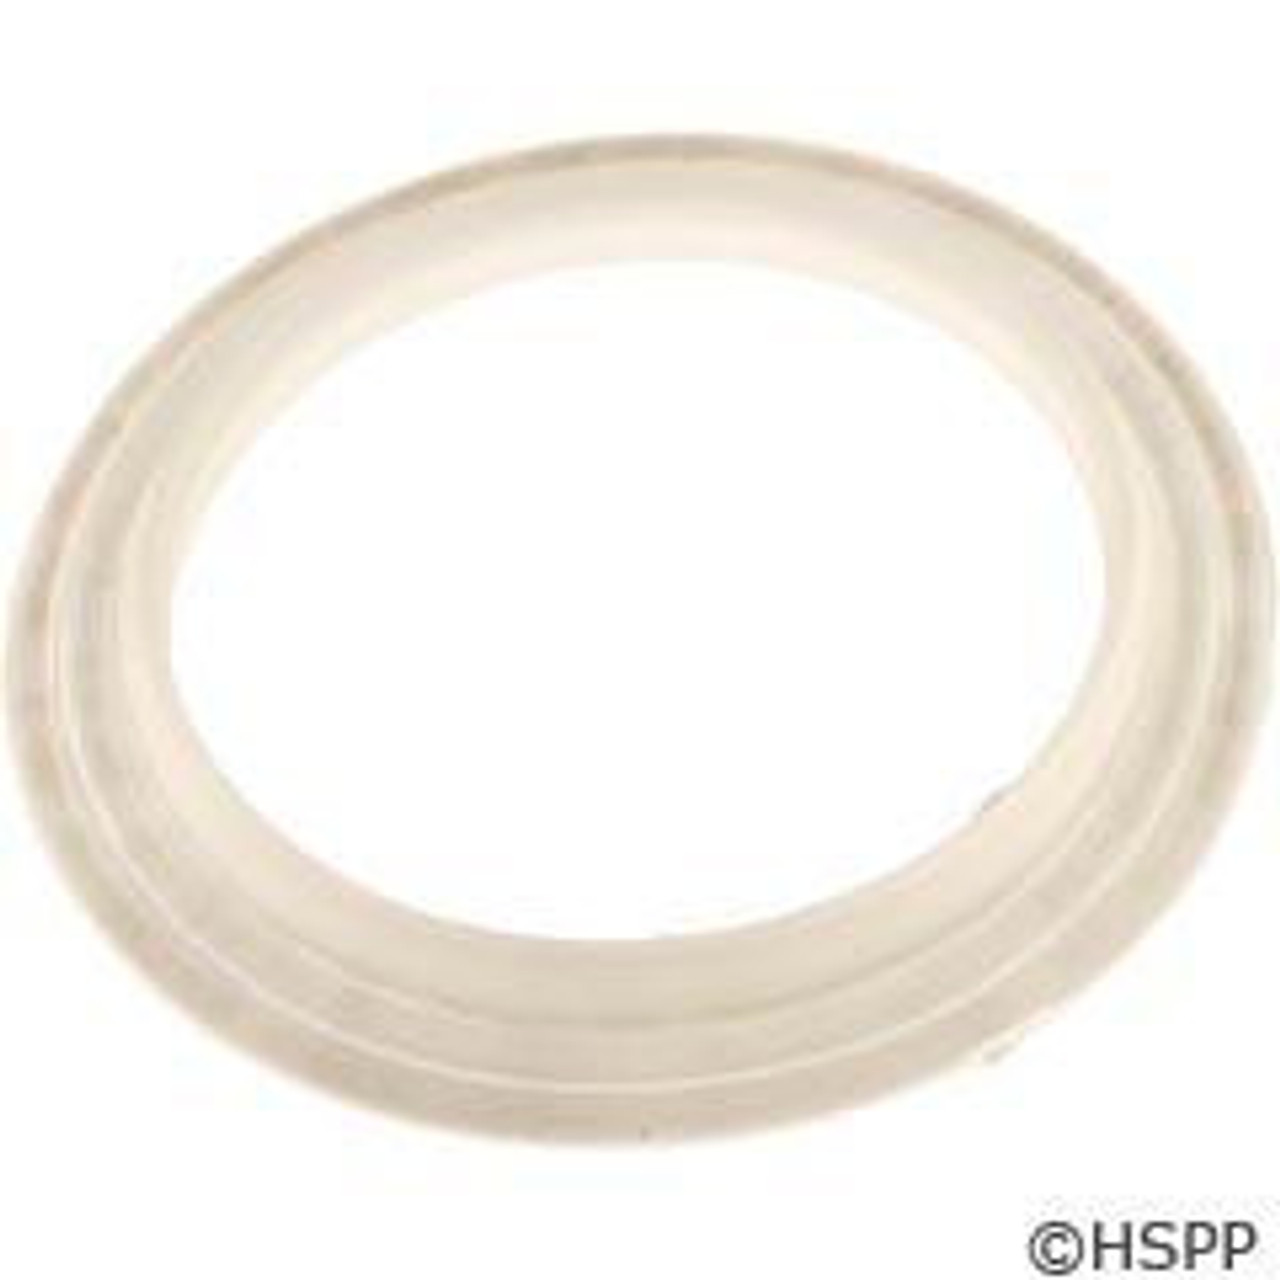 Gasket, BWG/Pent Cyclone Euro Jet, "L", Wall Fitting